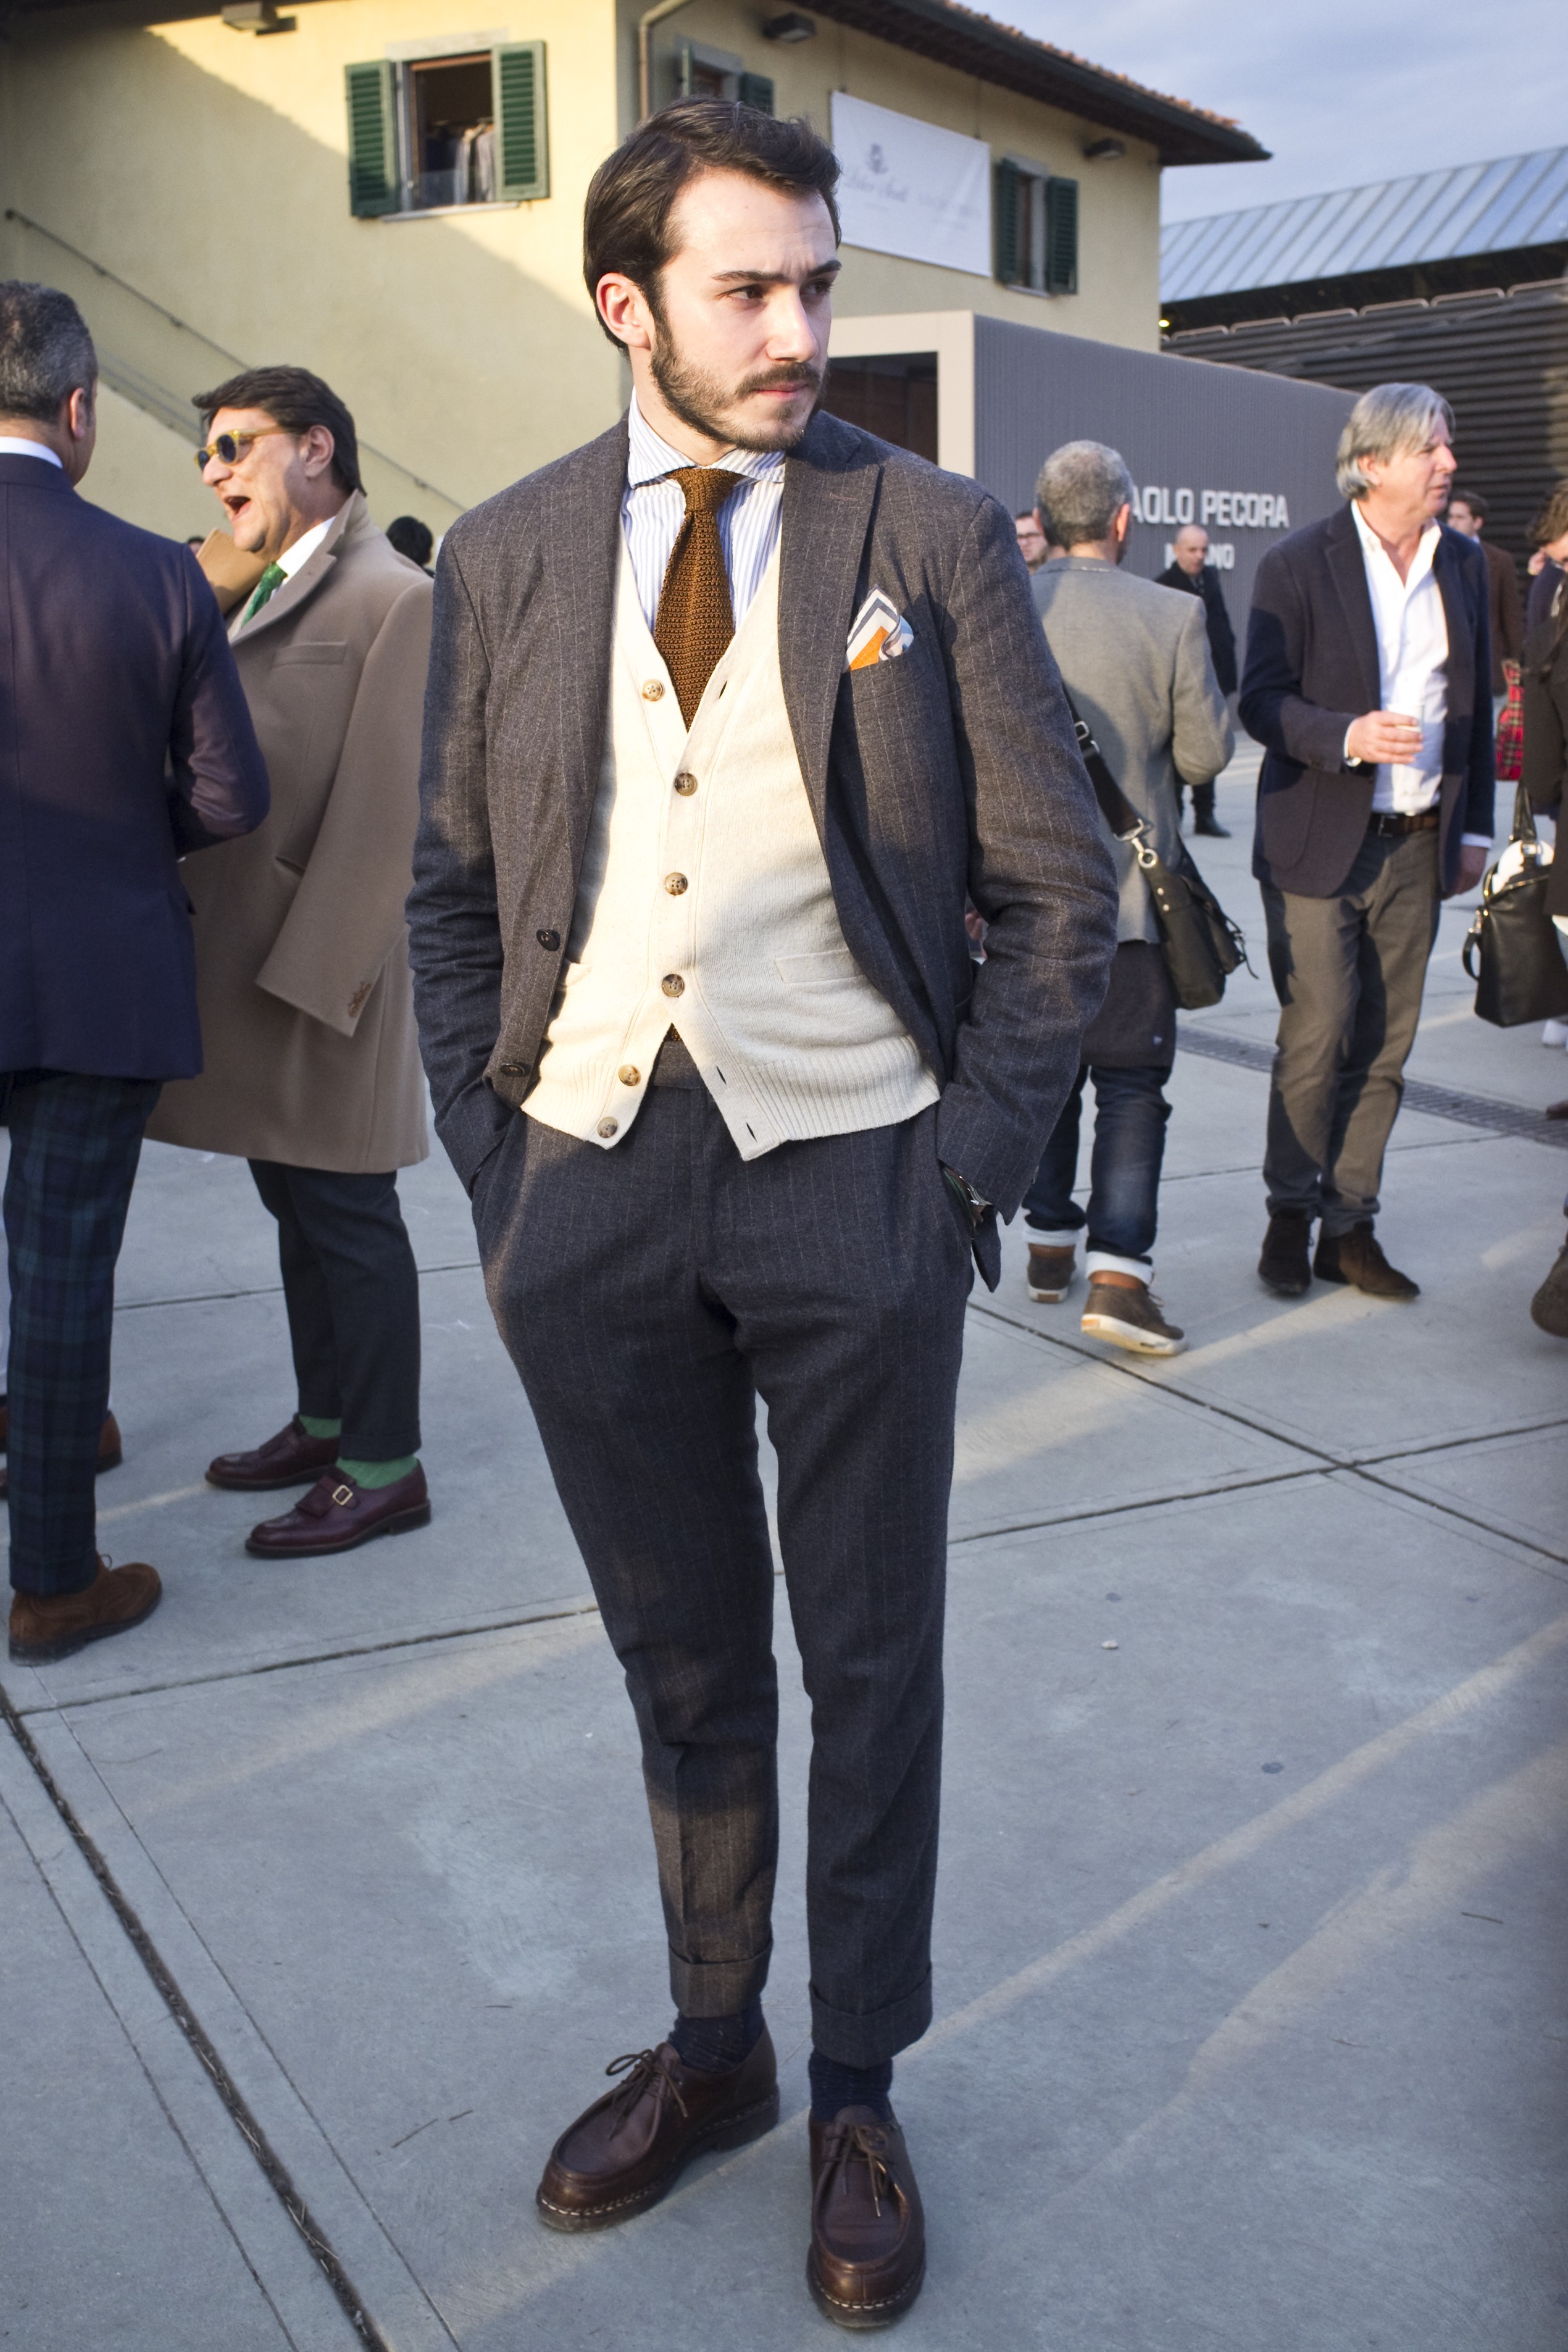 Pitti Uomo 87 in pictures | Page 3 | Styleforum